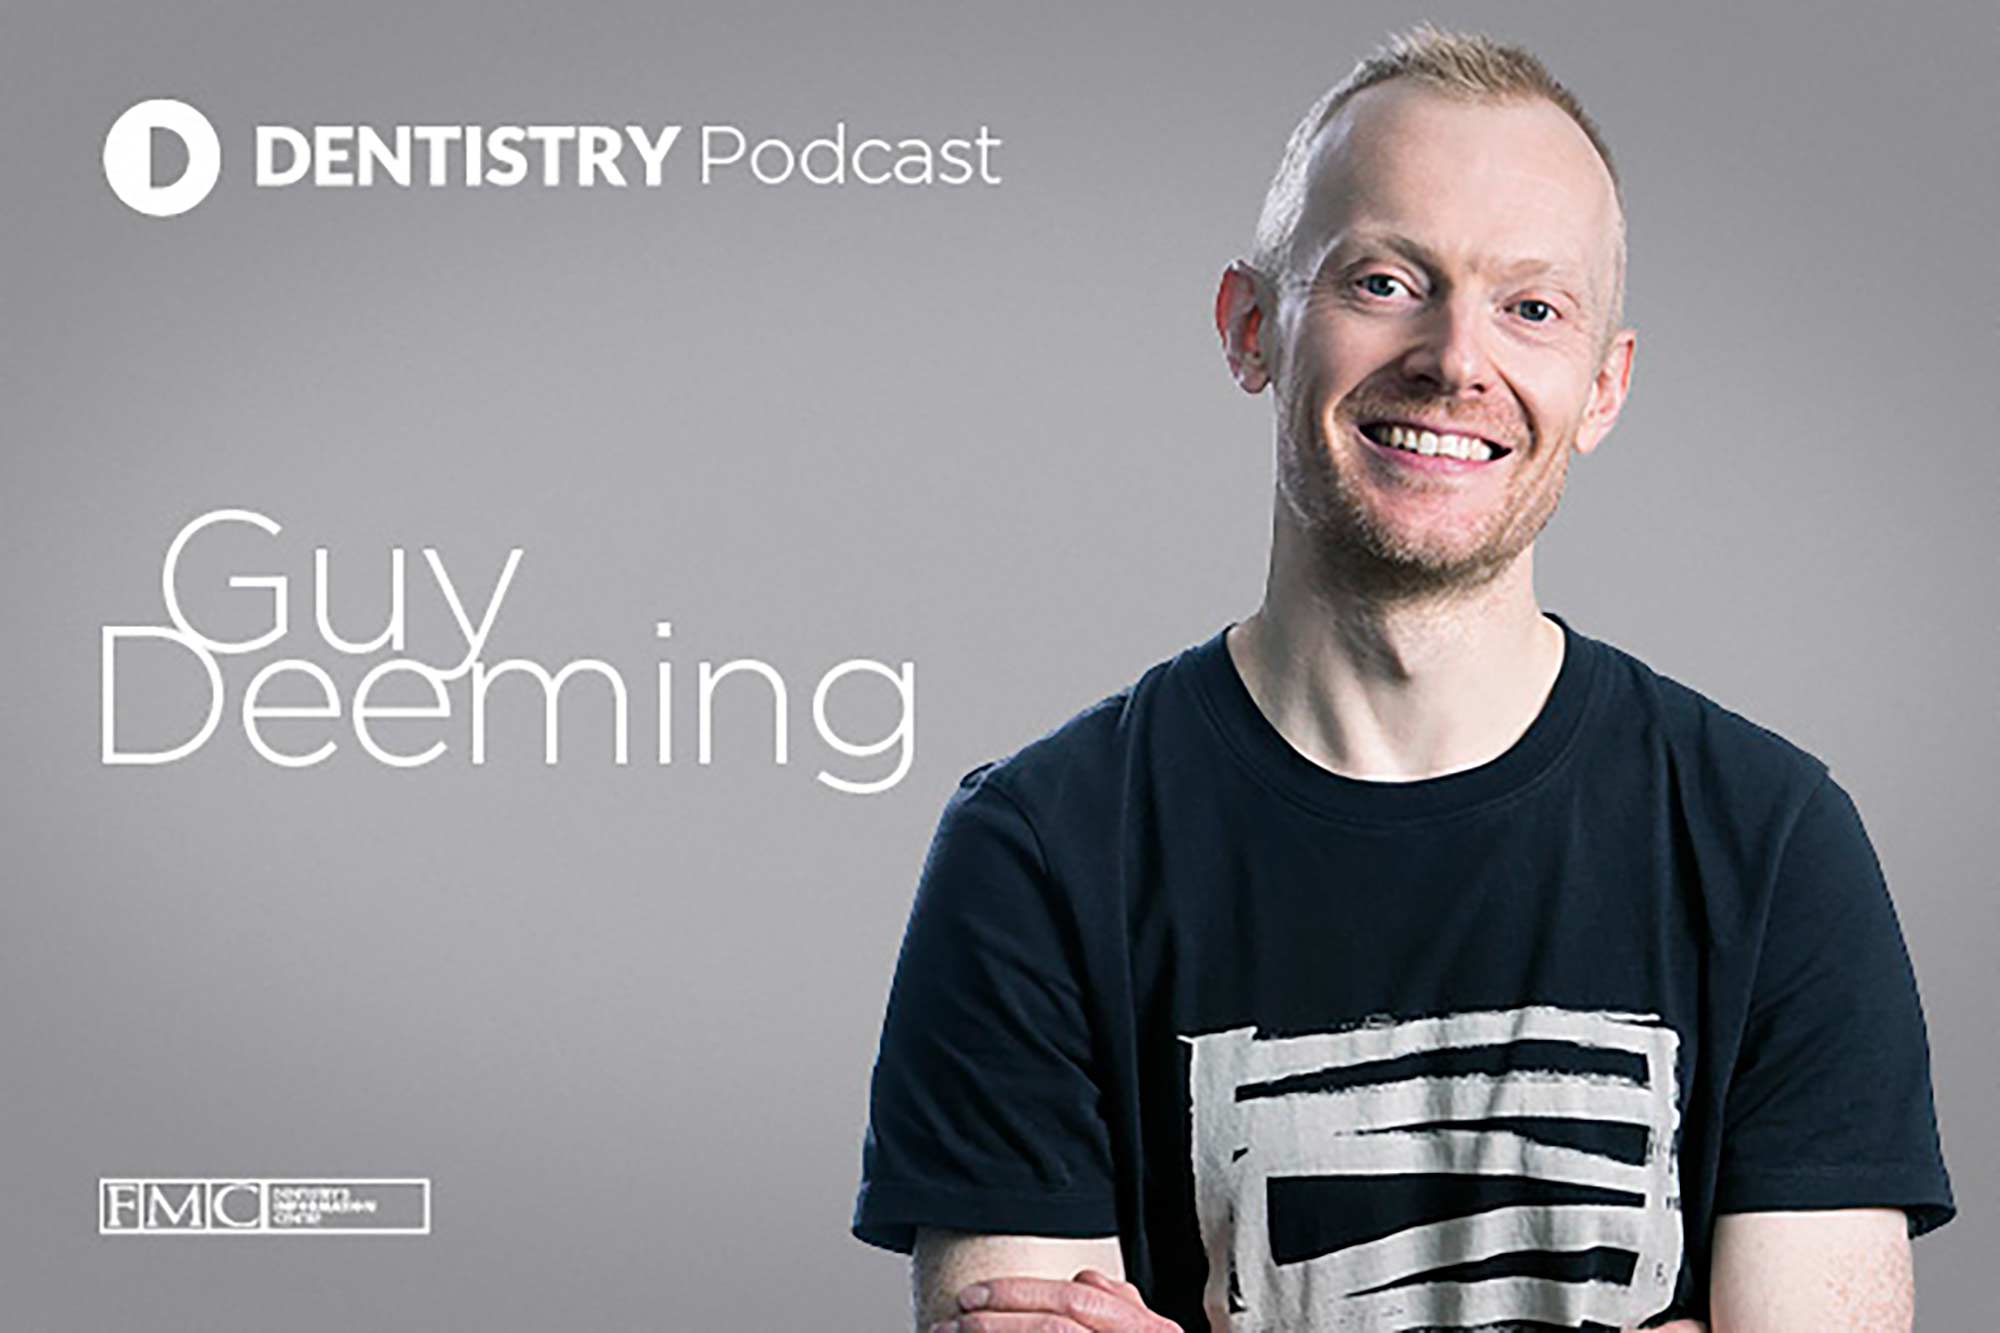 This week we welcome Guy Deeming, a specialist orthodontist at Queensway Orthodontics, to chat about why dentistry needs to embrace the digital